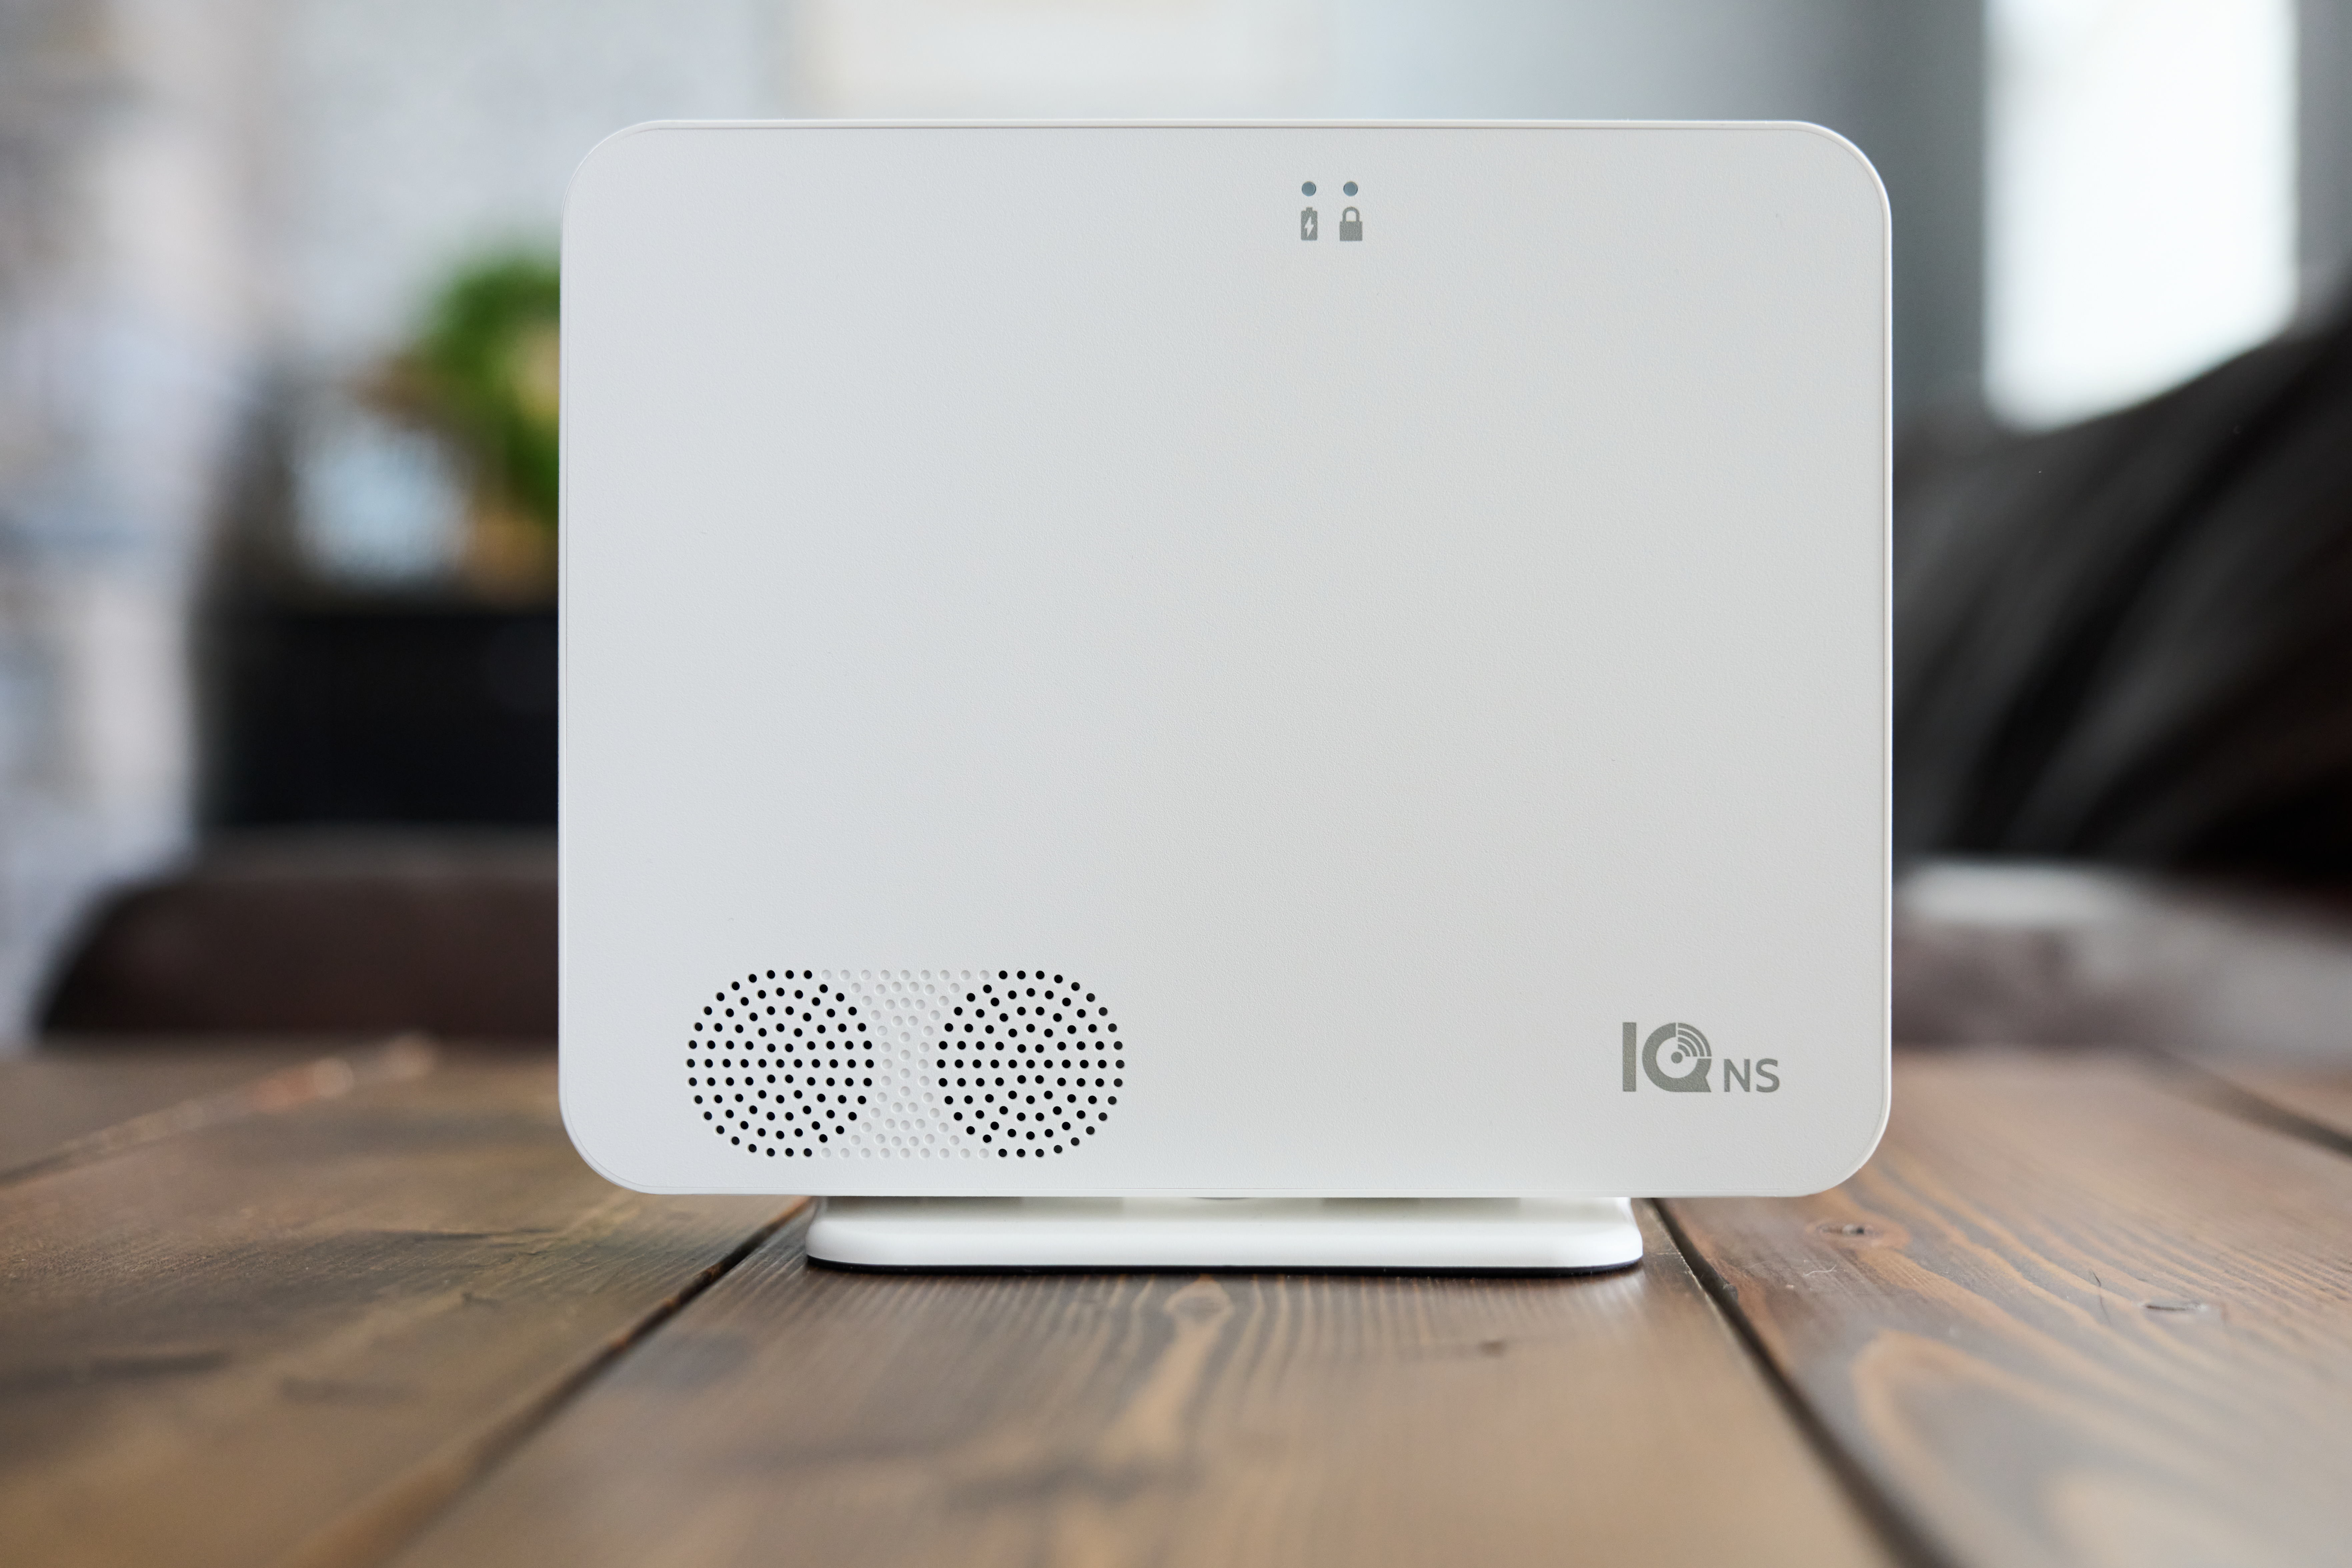 image of the IQ4 NS 2 home security system